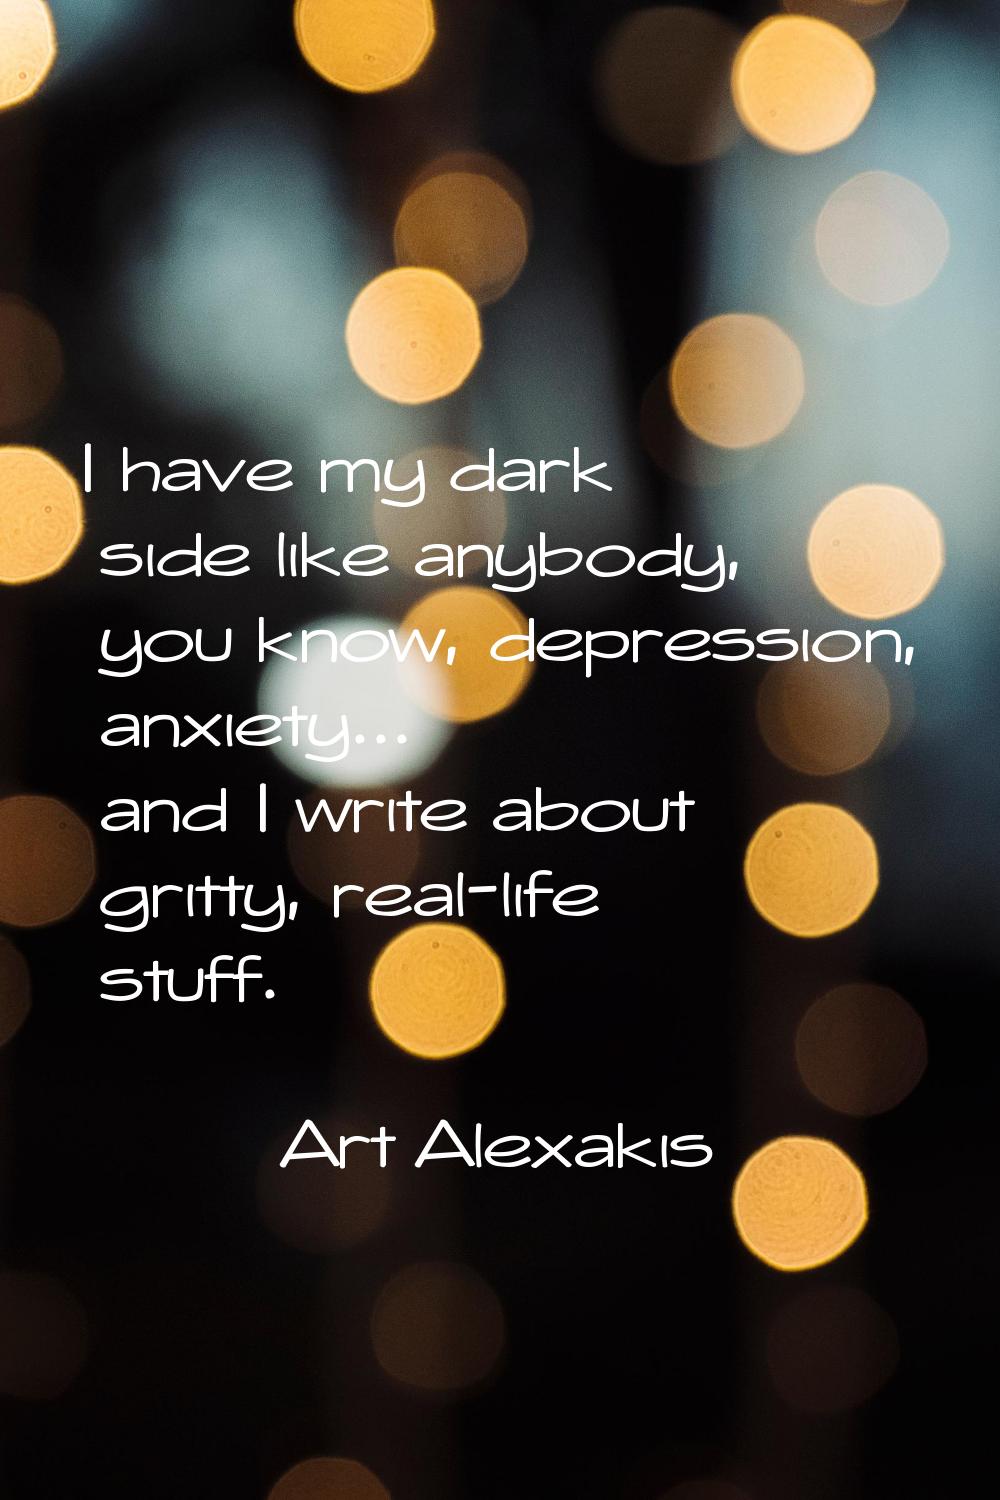 I have my dark side like anybody, you know, depression, anxiety... and I write about gritty, real-l